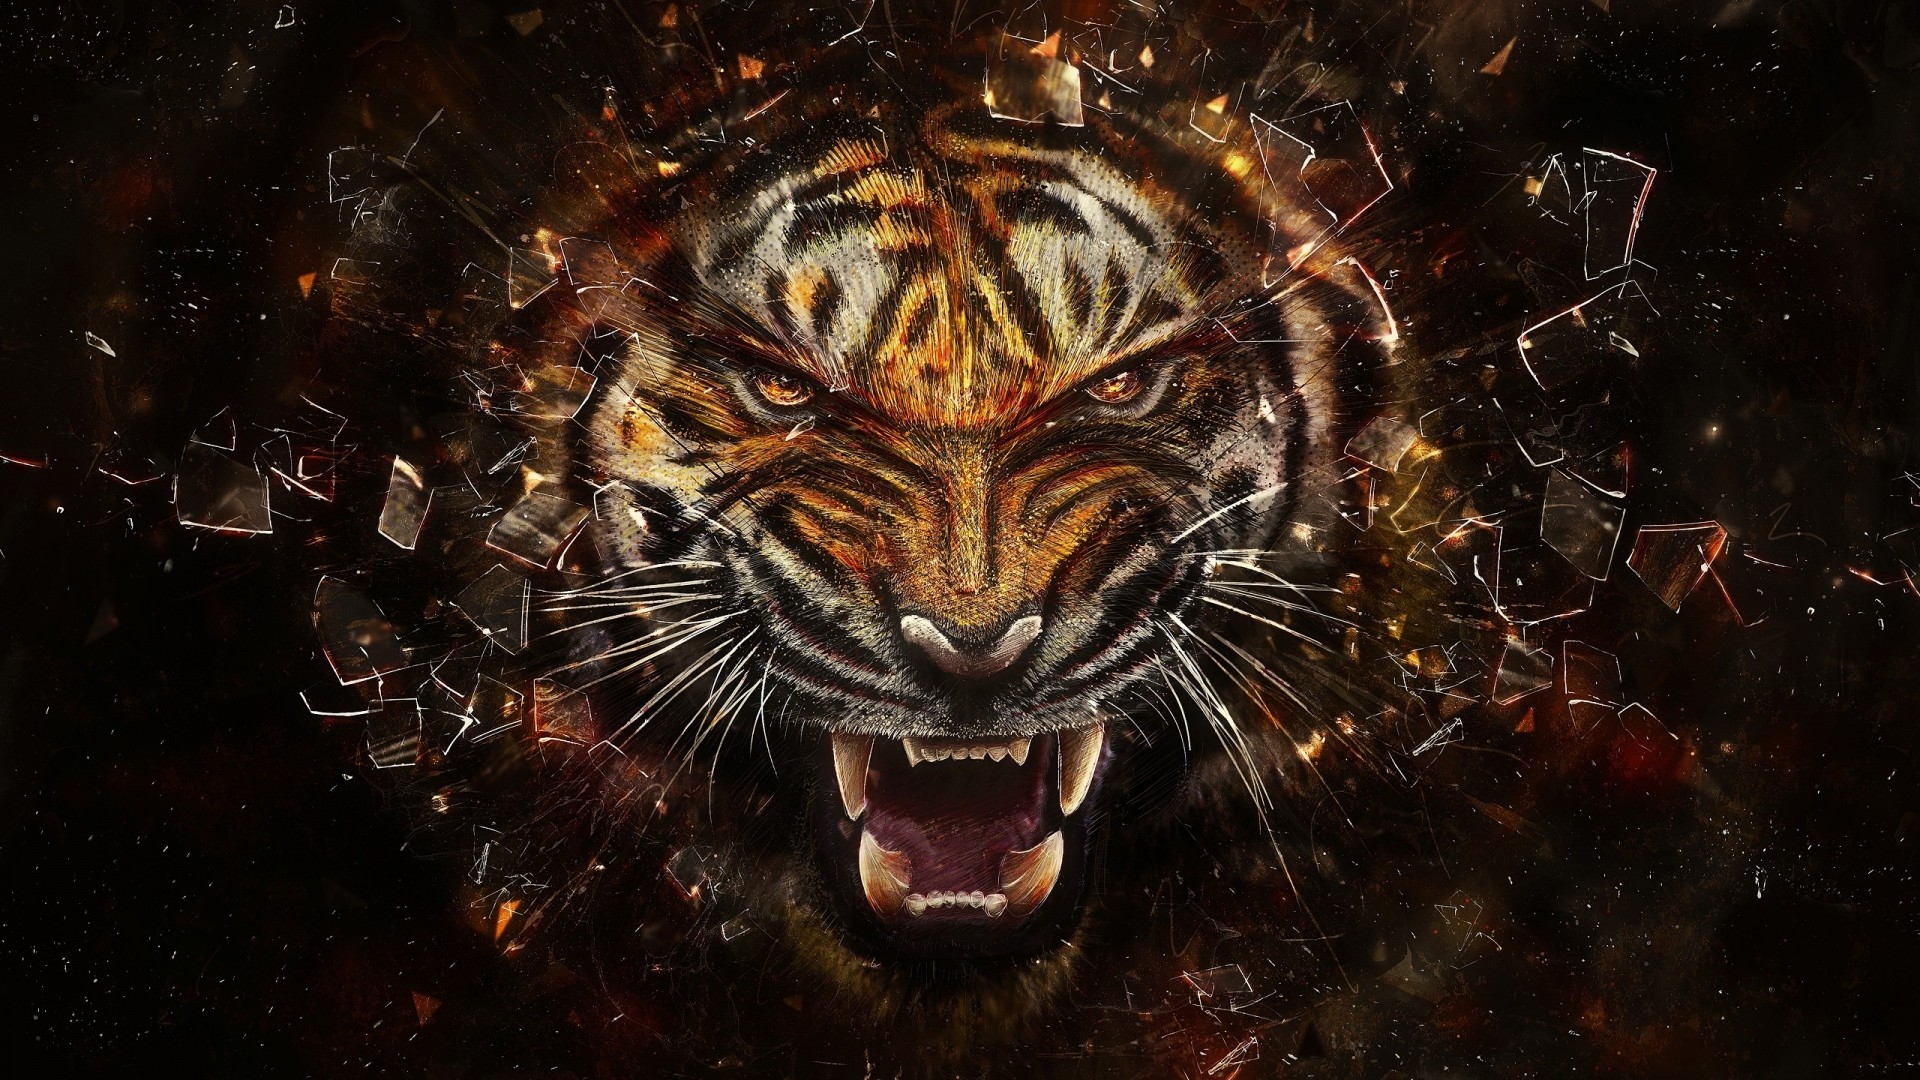 1920x1080 ... Background Full HD 1080p.  Wallpaper tiger, glass, shards,  aggression, teeth